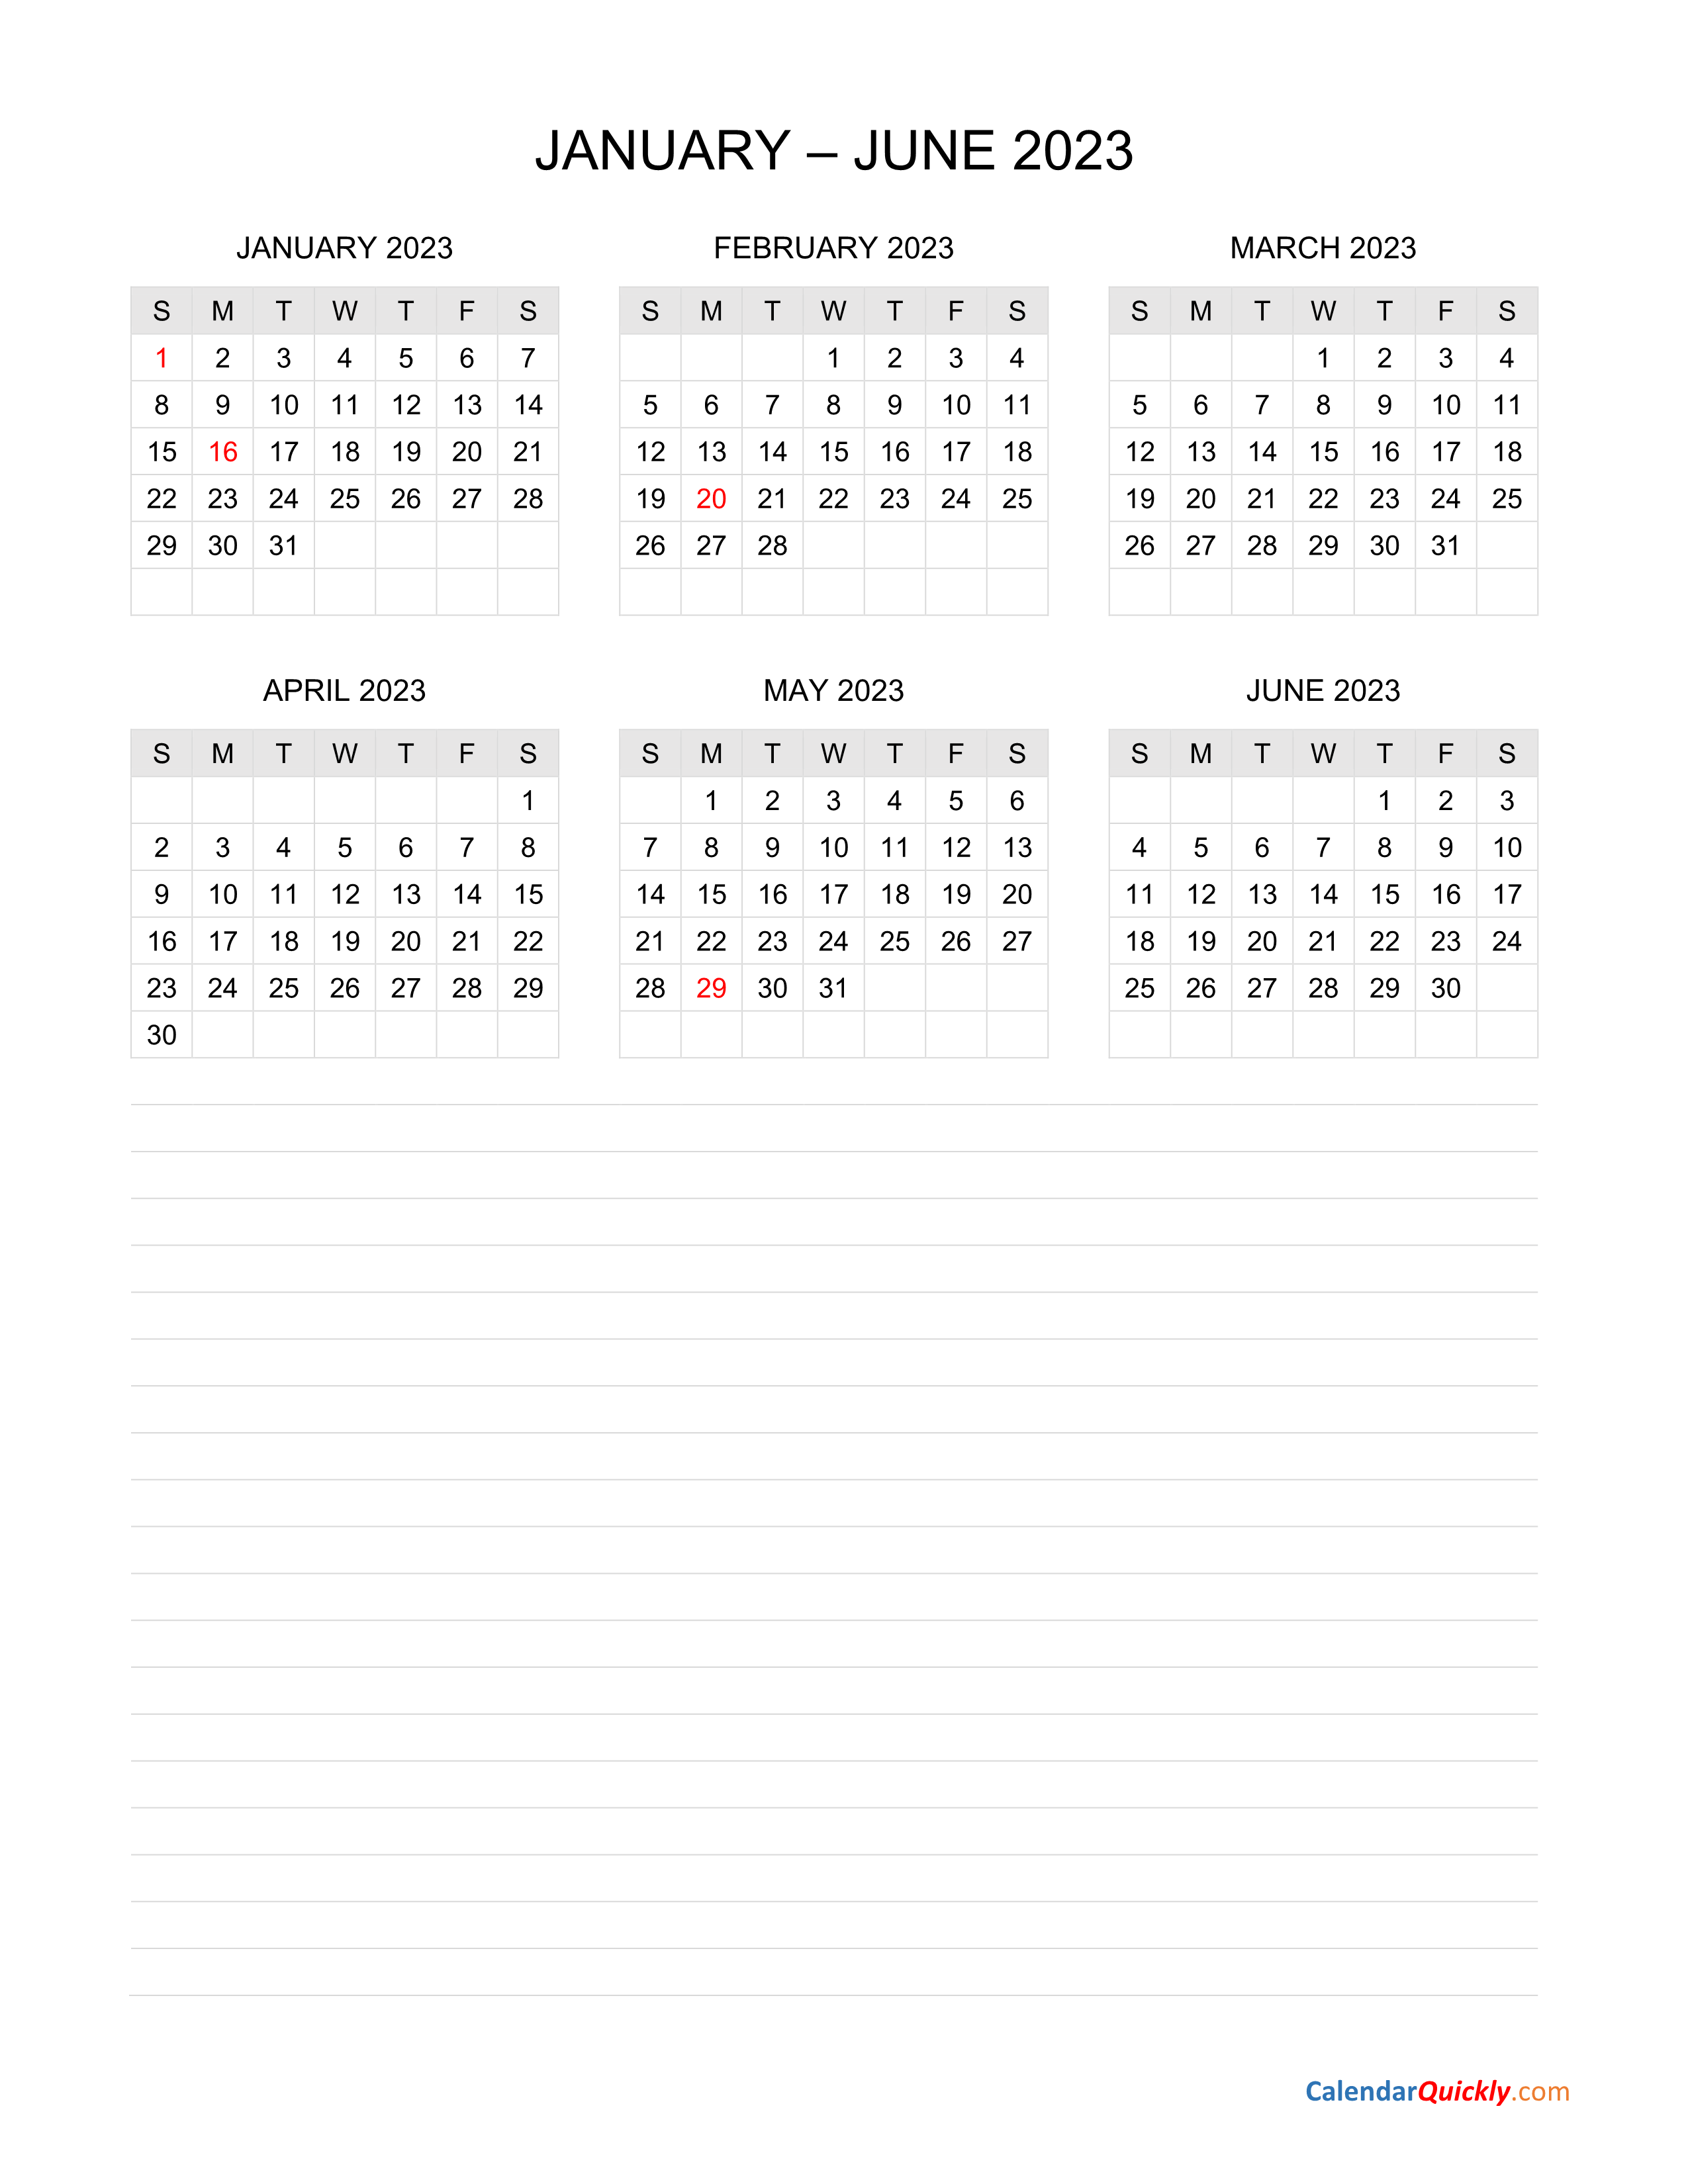 January to June 2023 Calendar with Notes | Calendar Quickly